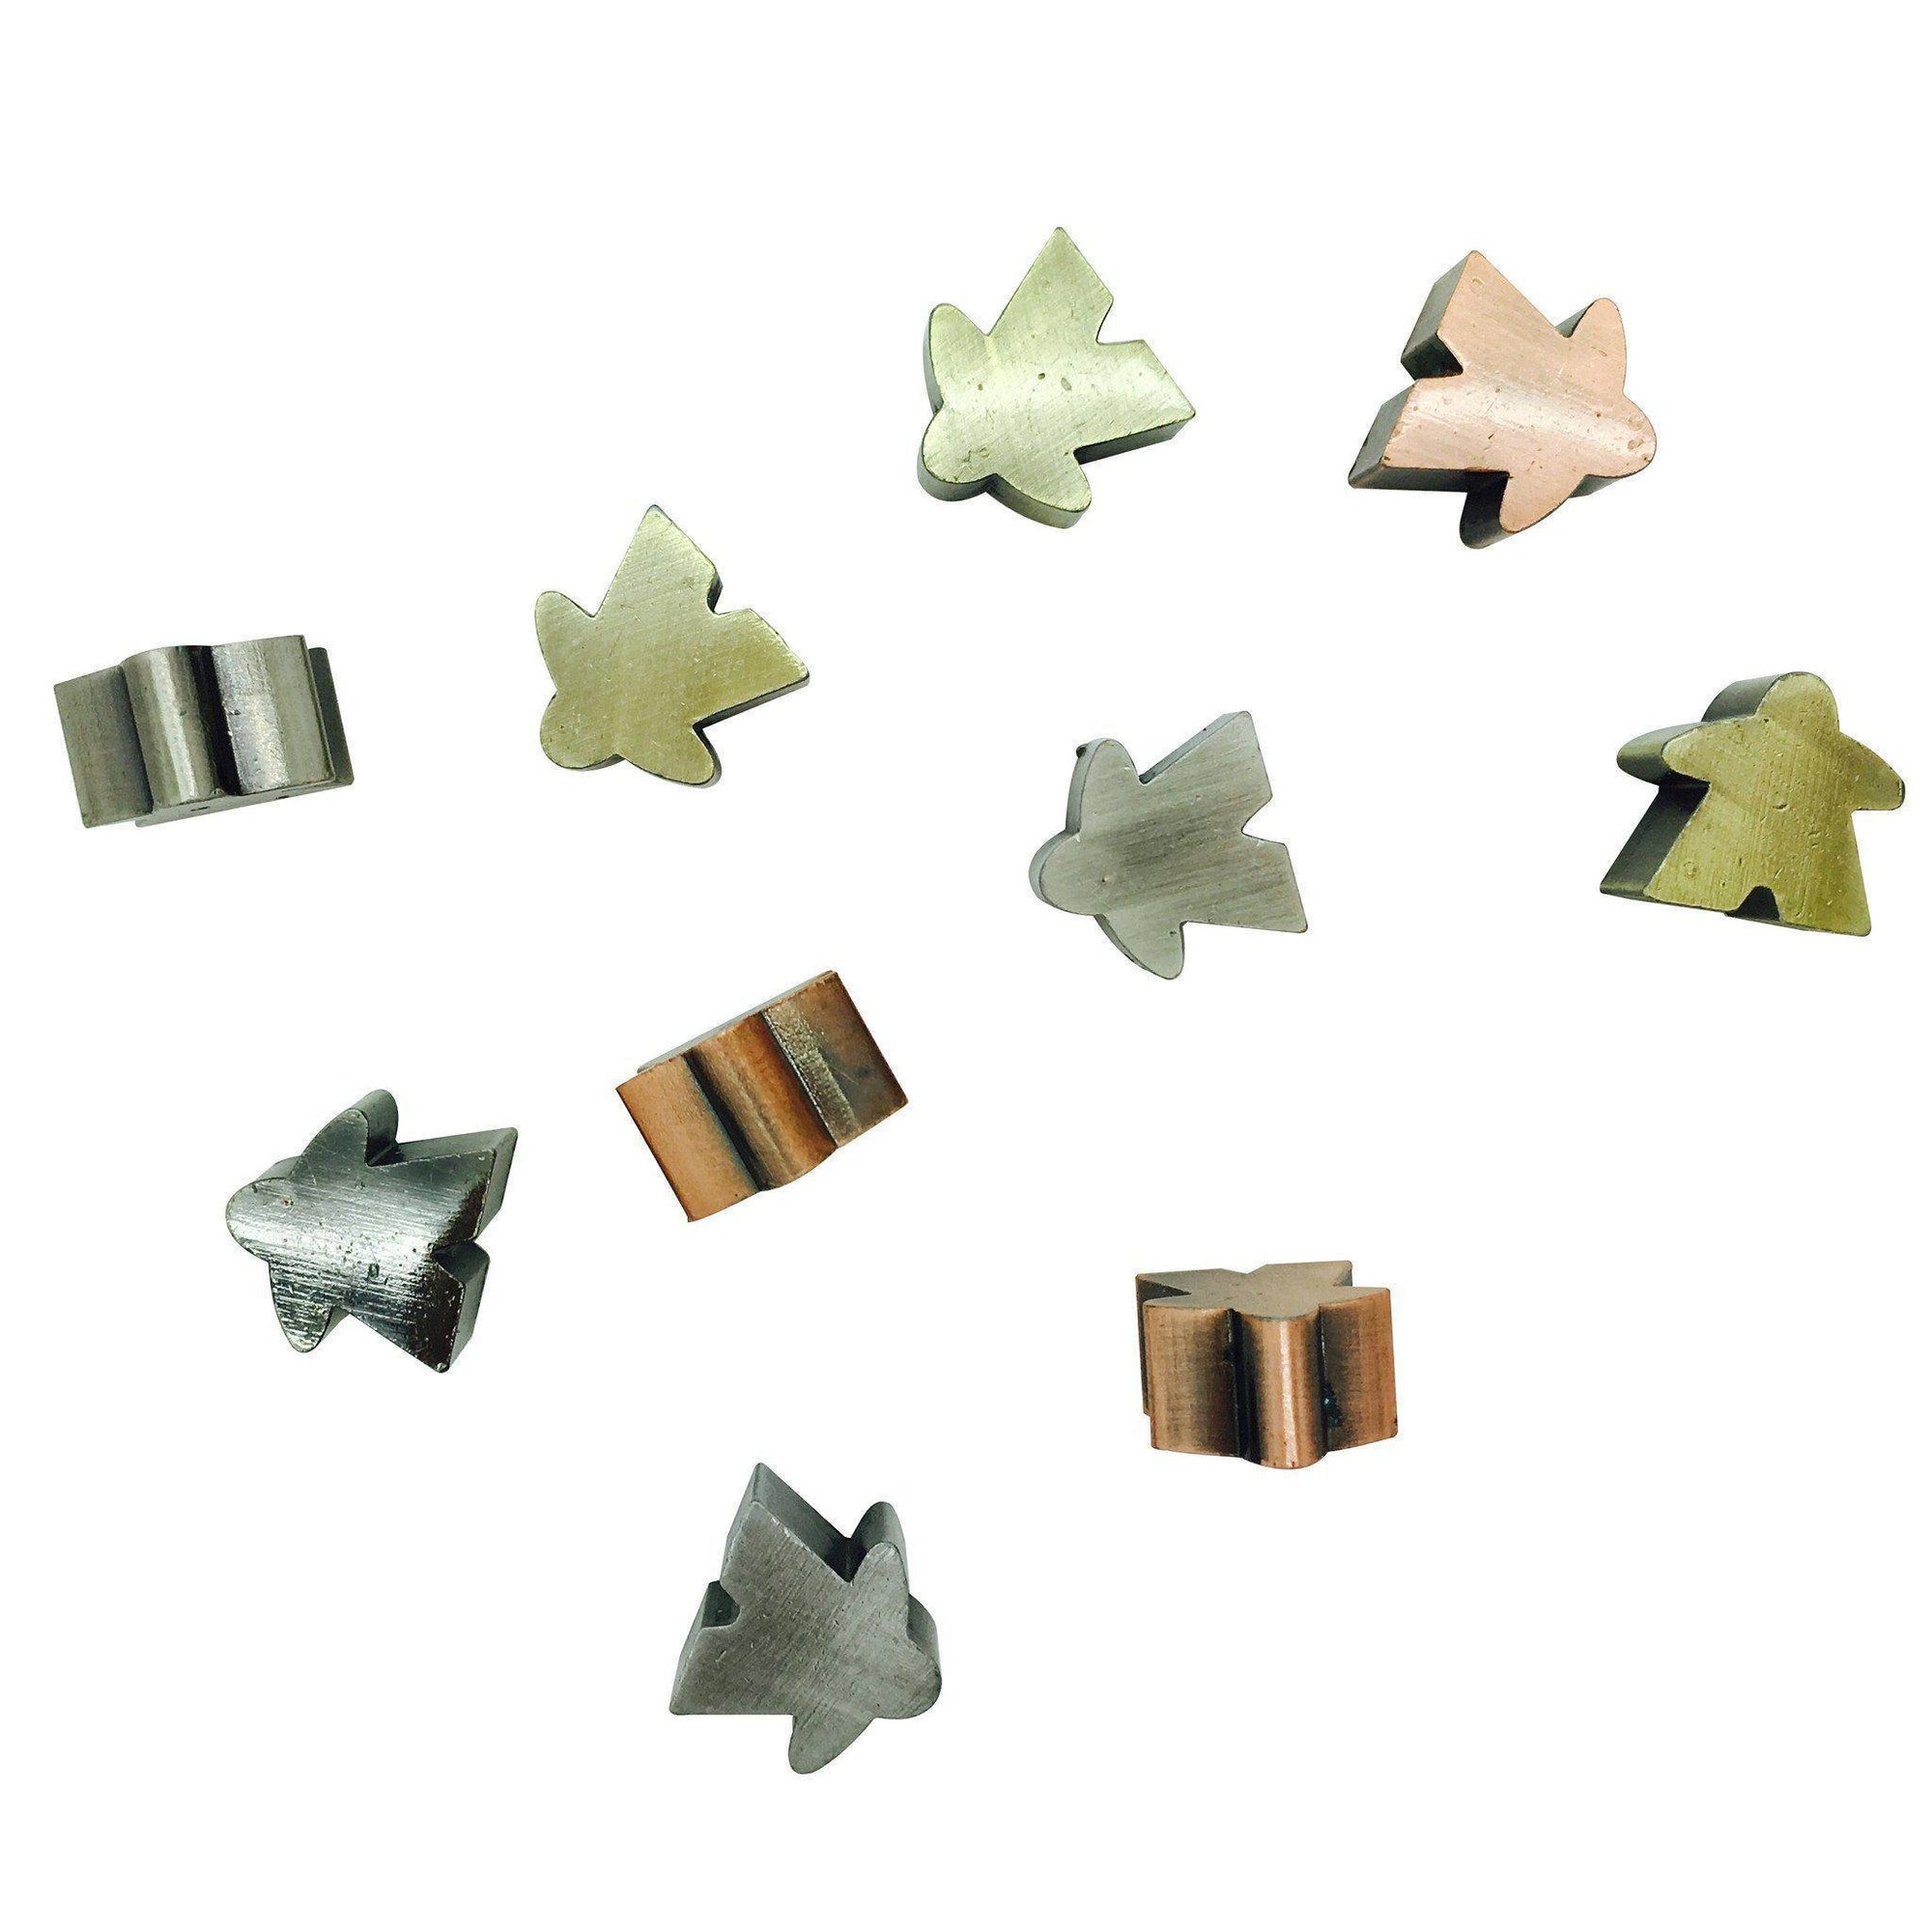 10 Pack of Metal Meeples (Random Colors)-Accessories-Norse Foundry-DND Dice-Polyhedral Dice-D20-Metal Dice-Precision Dice-Luxury Dice-Dungeons and Dragons-D&D-